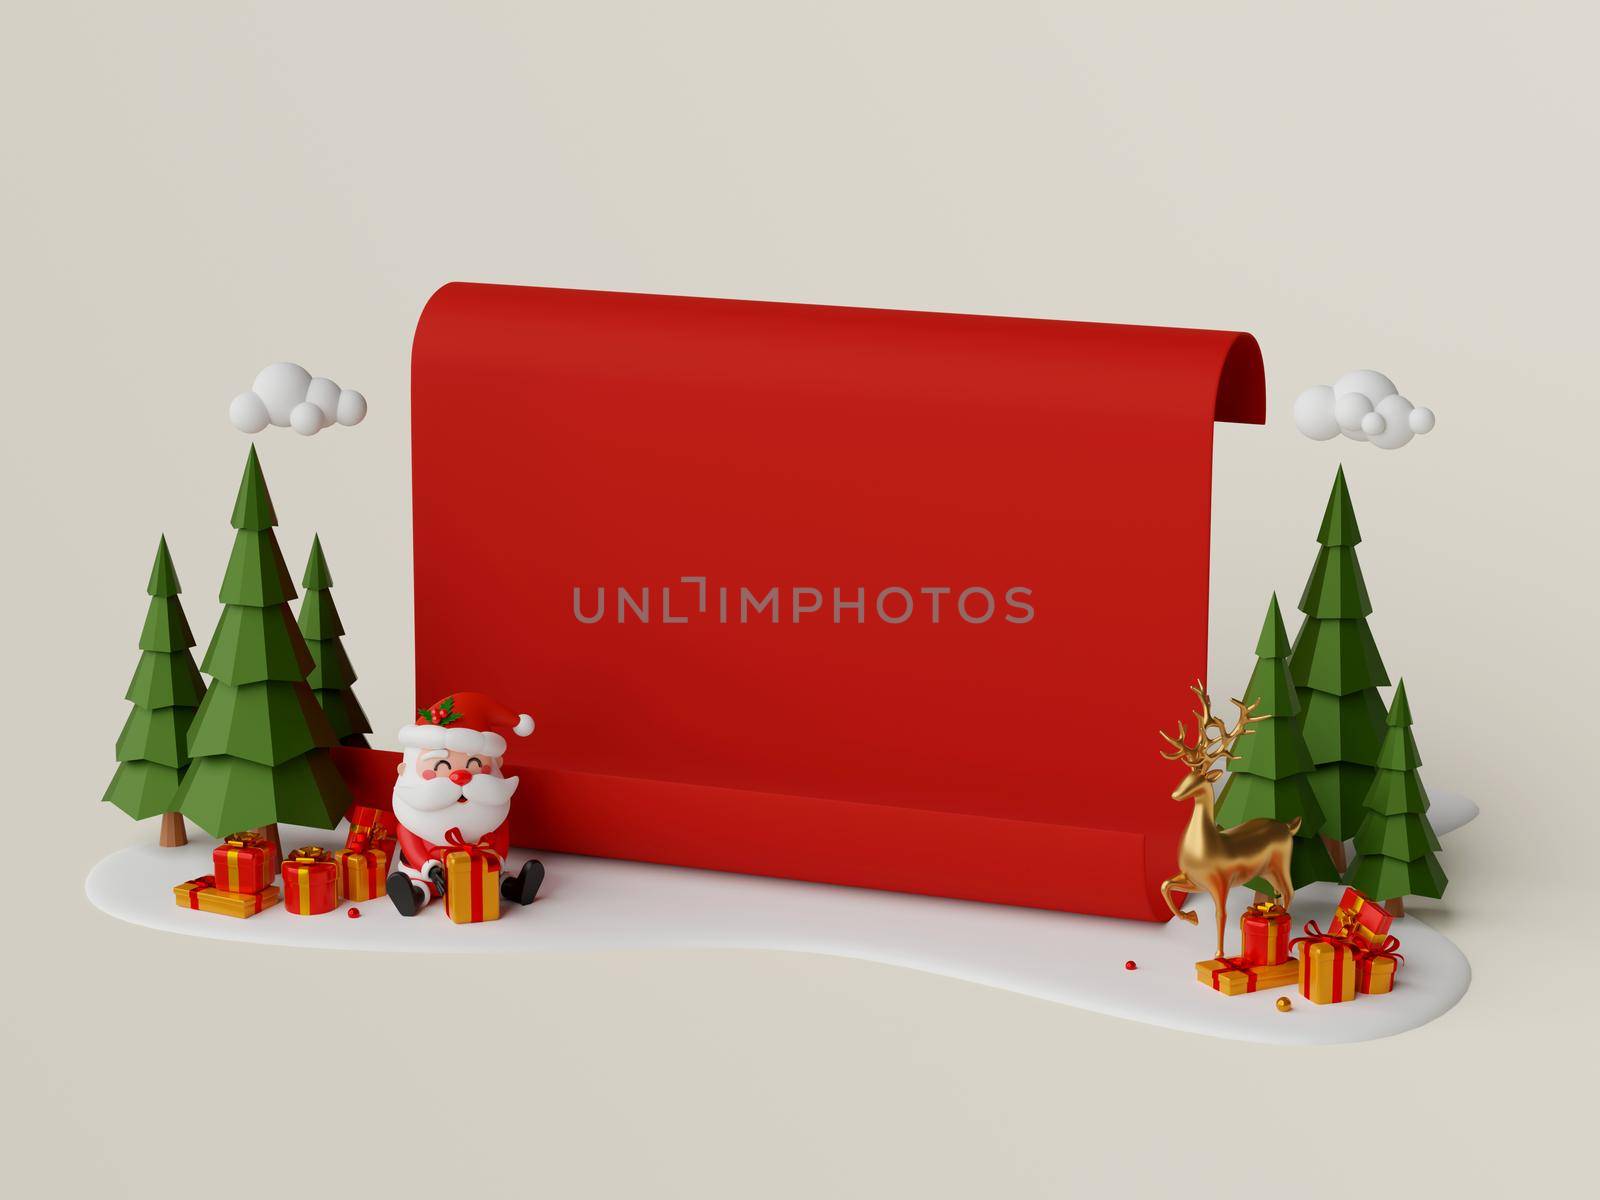 3d illustration of Christmas red paper on snow ground with Santa Claus and giftbox by nutzchotwarut